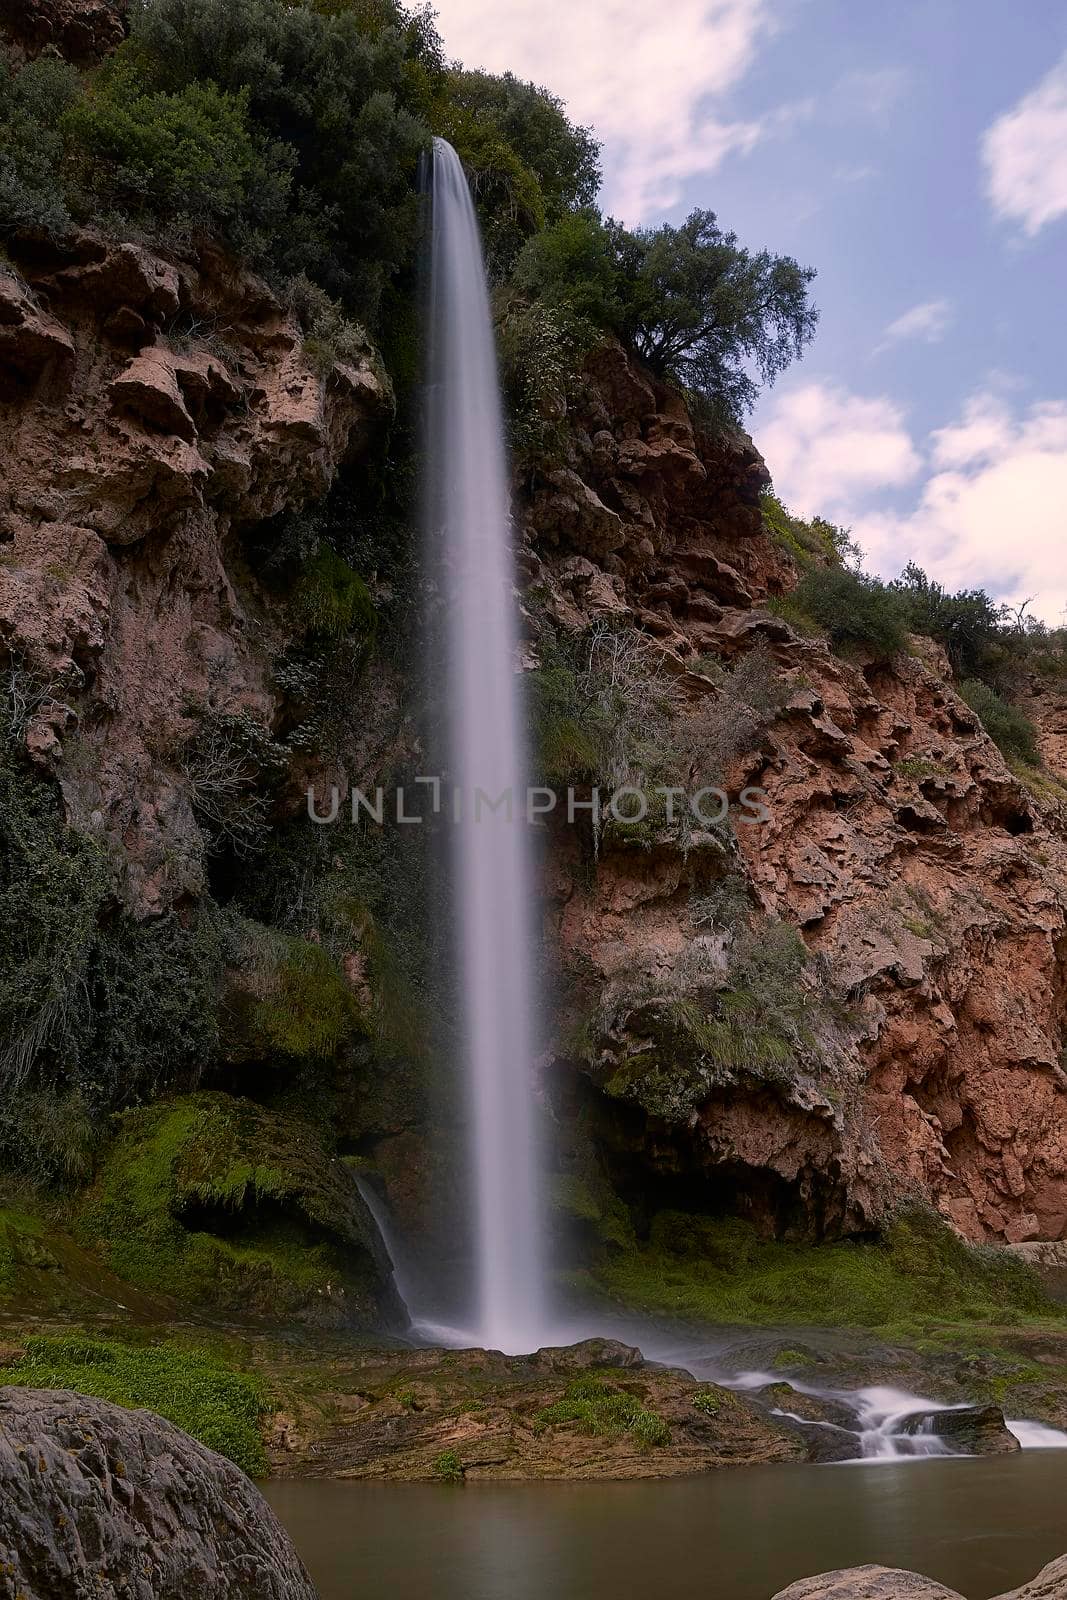 A large waterfall on a sunny dayFront view, long exposure, silk effect water. Bride jumping